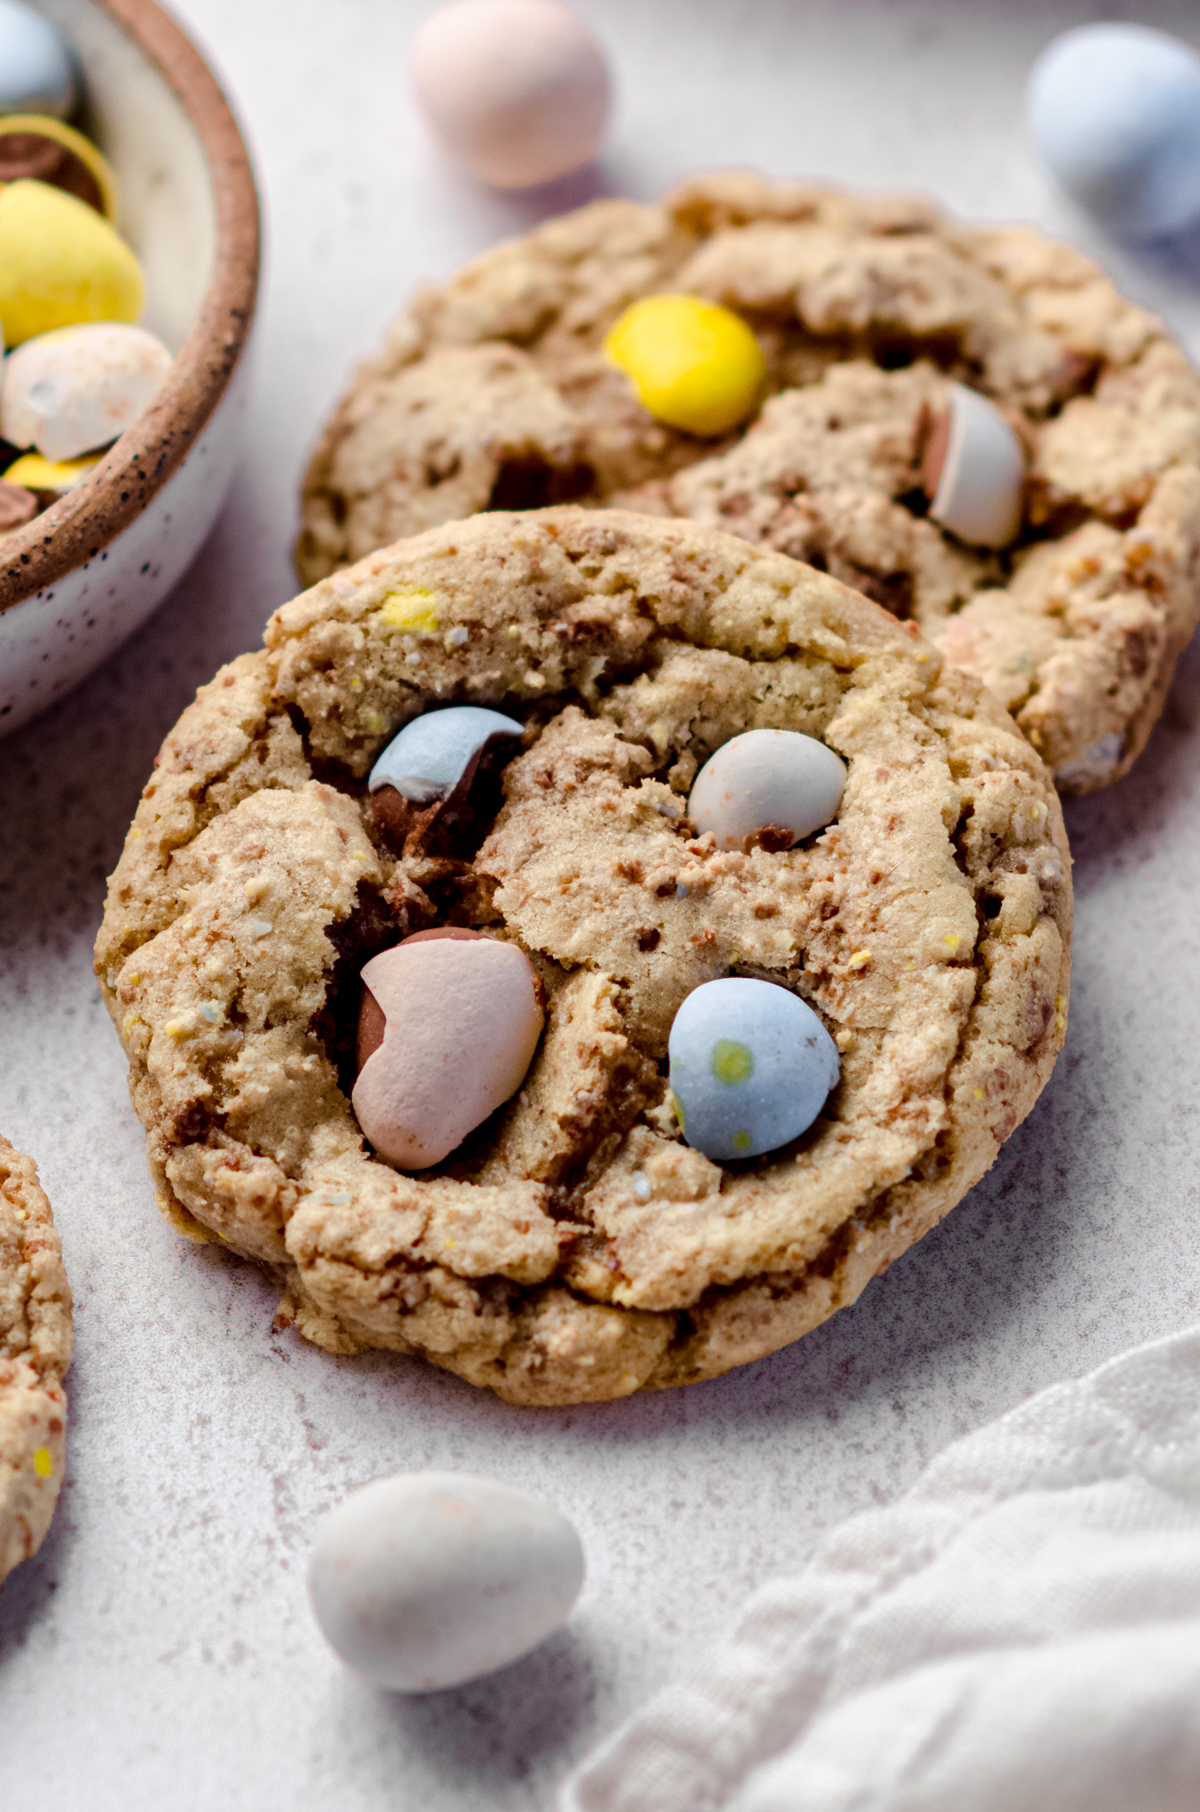 Mini egg cookies on a surface.